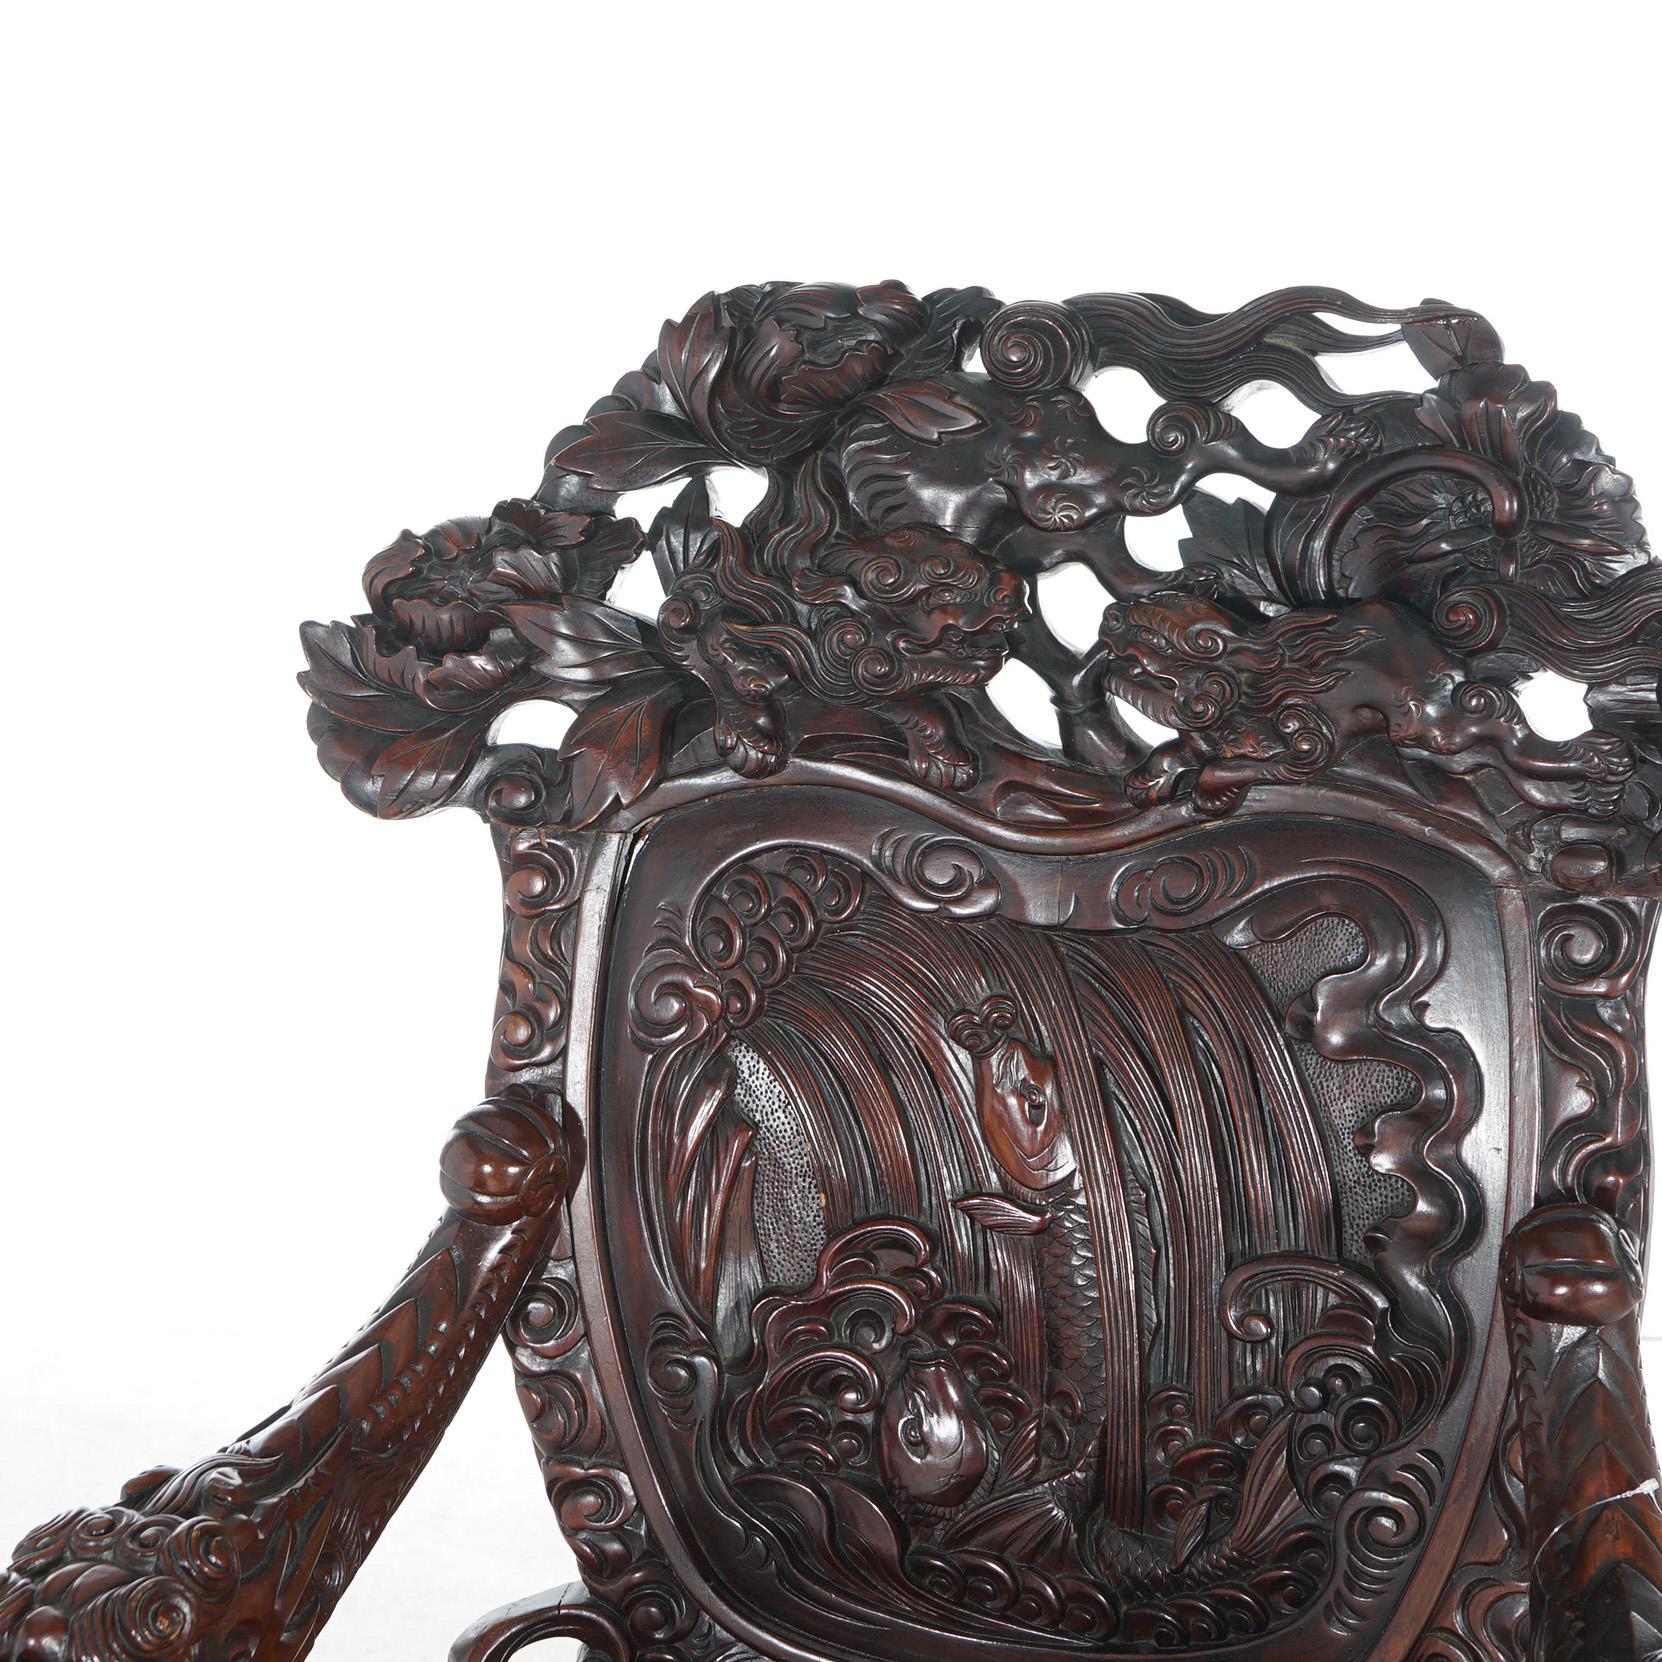 Antique Chinese Deep Carved Rosewood Figural King Throne Chair with Dragons 1920 For Sale 1